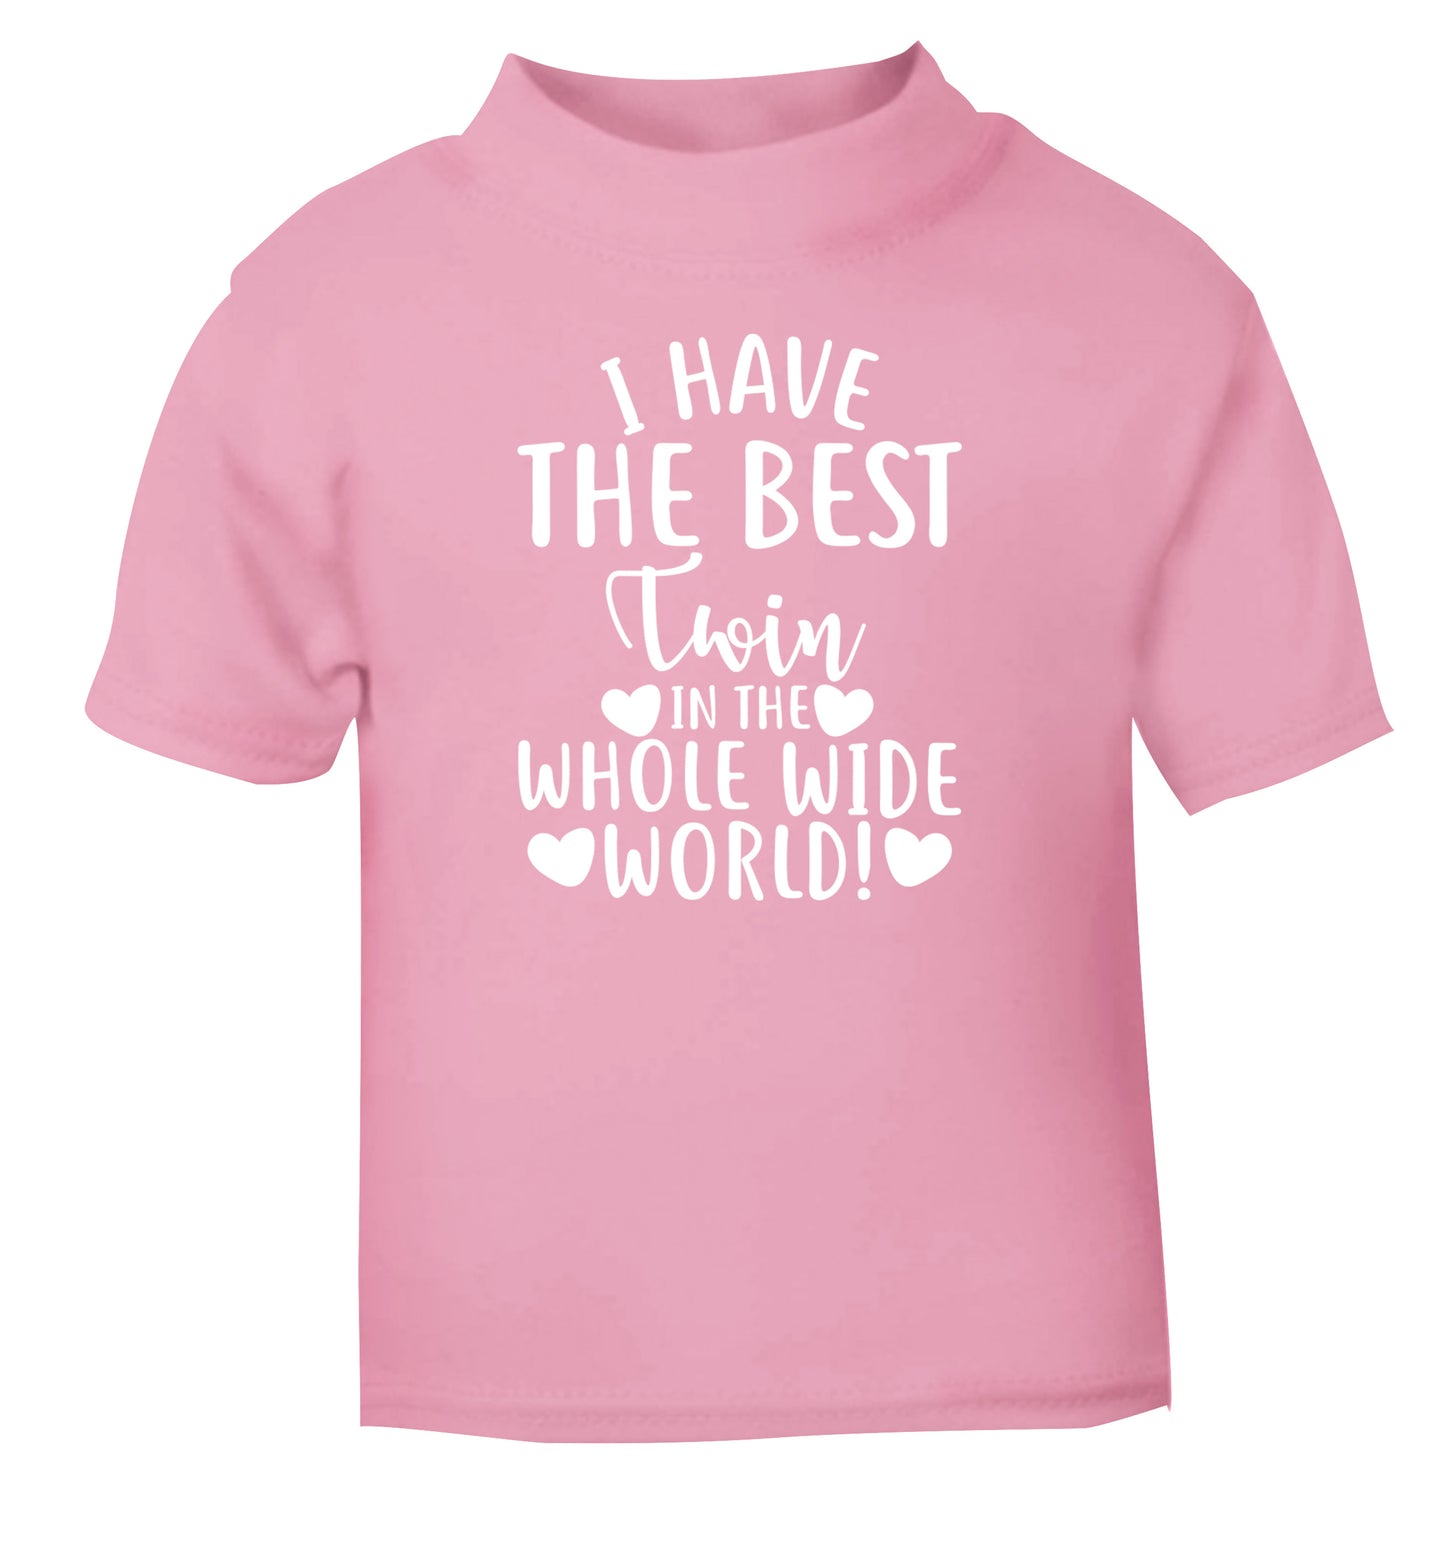 I have the best twin in the whole wide world! light pink Baby Toddler Tshirt 2 Years